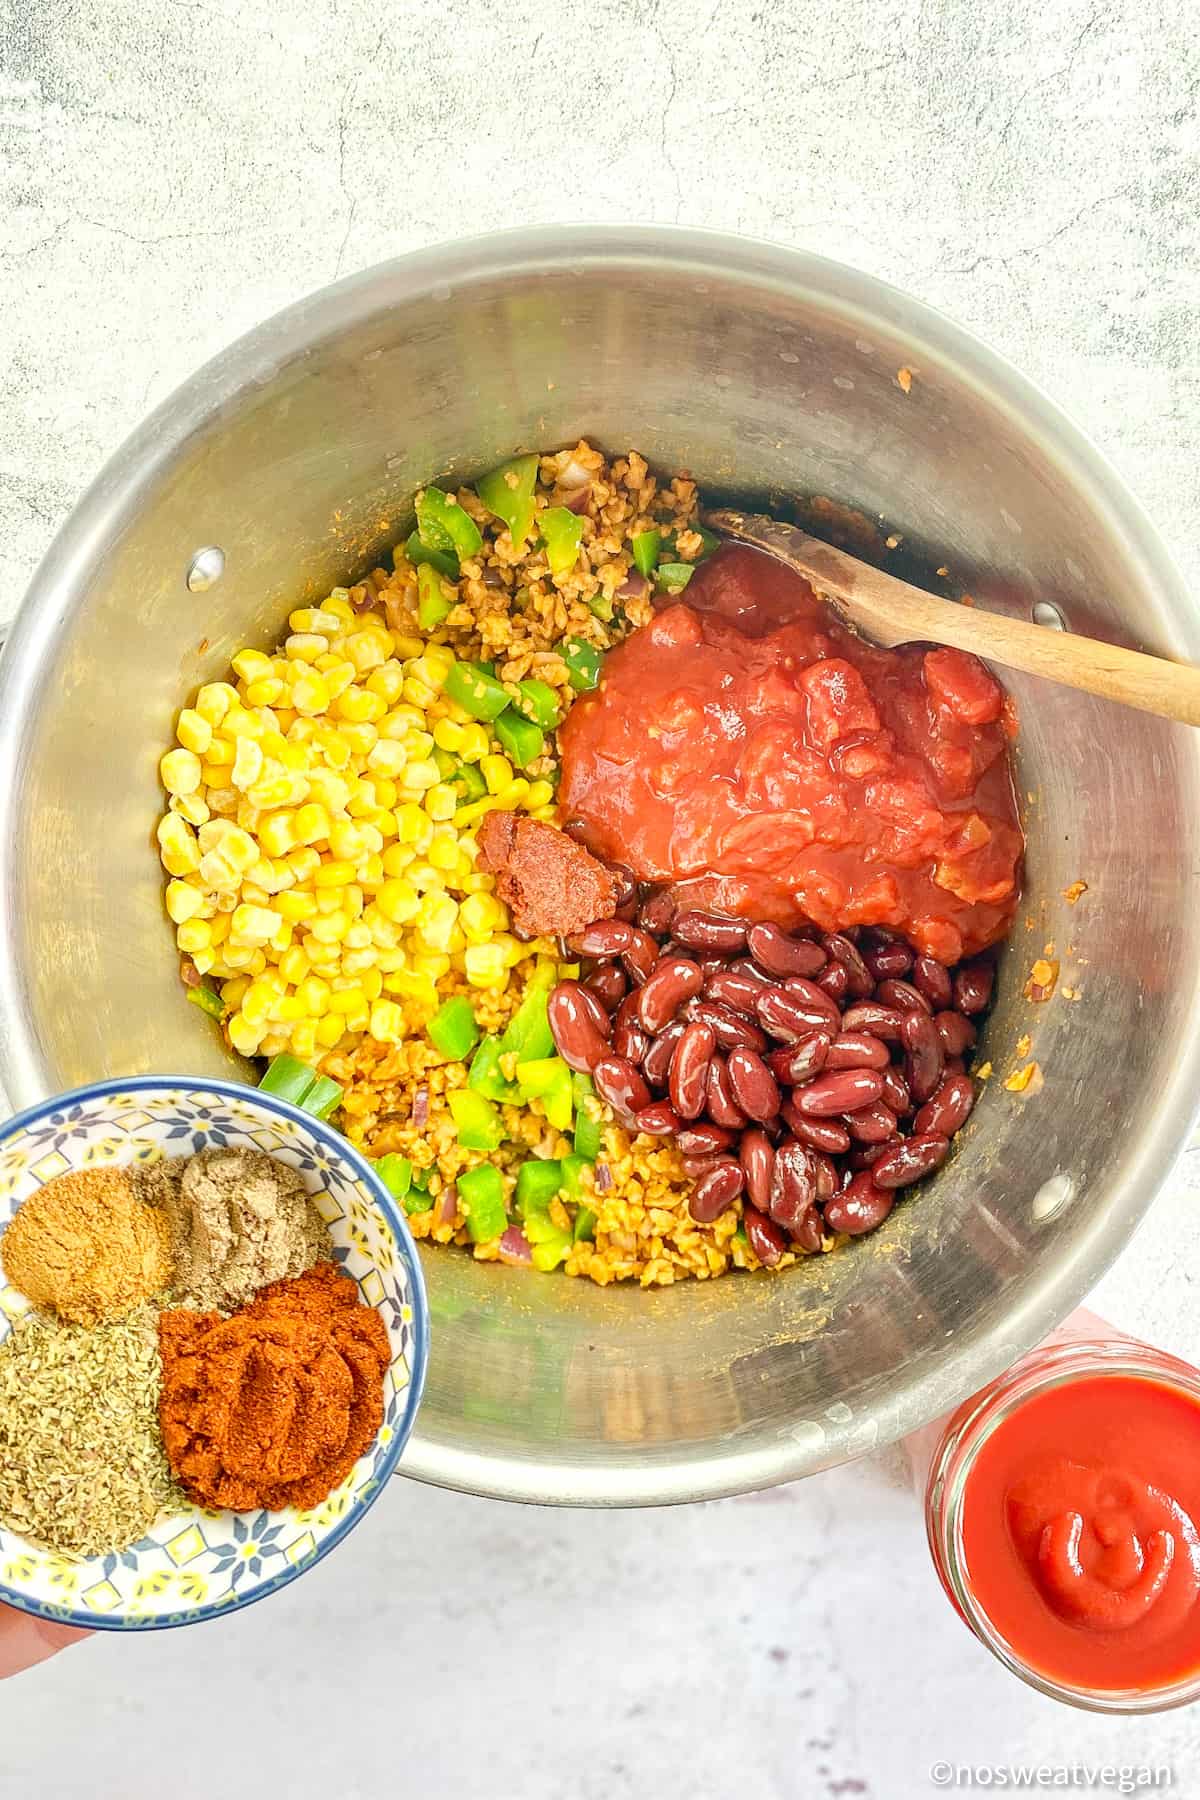 Pot with chili, corn, tomatoes, beans, and spices.